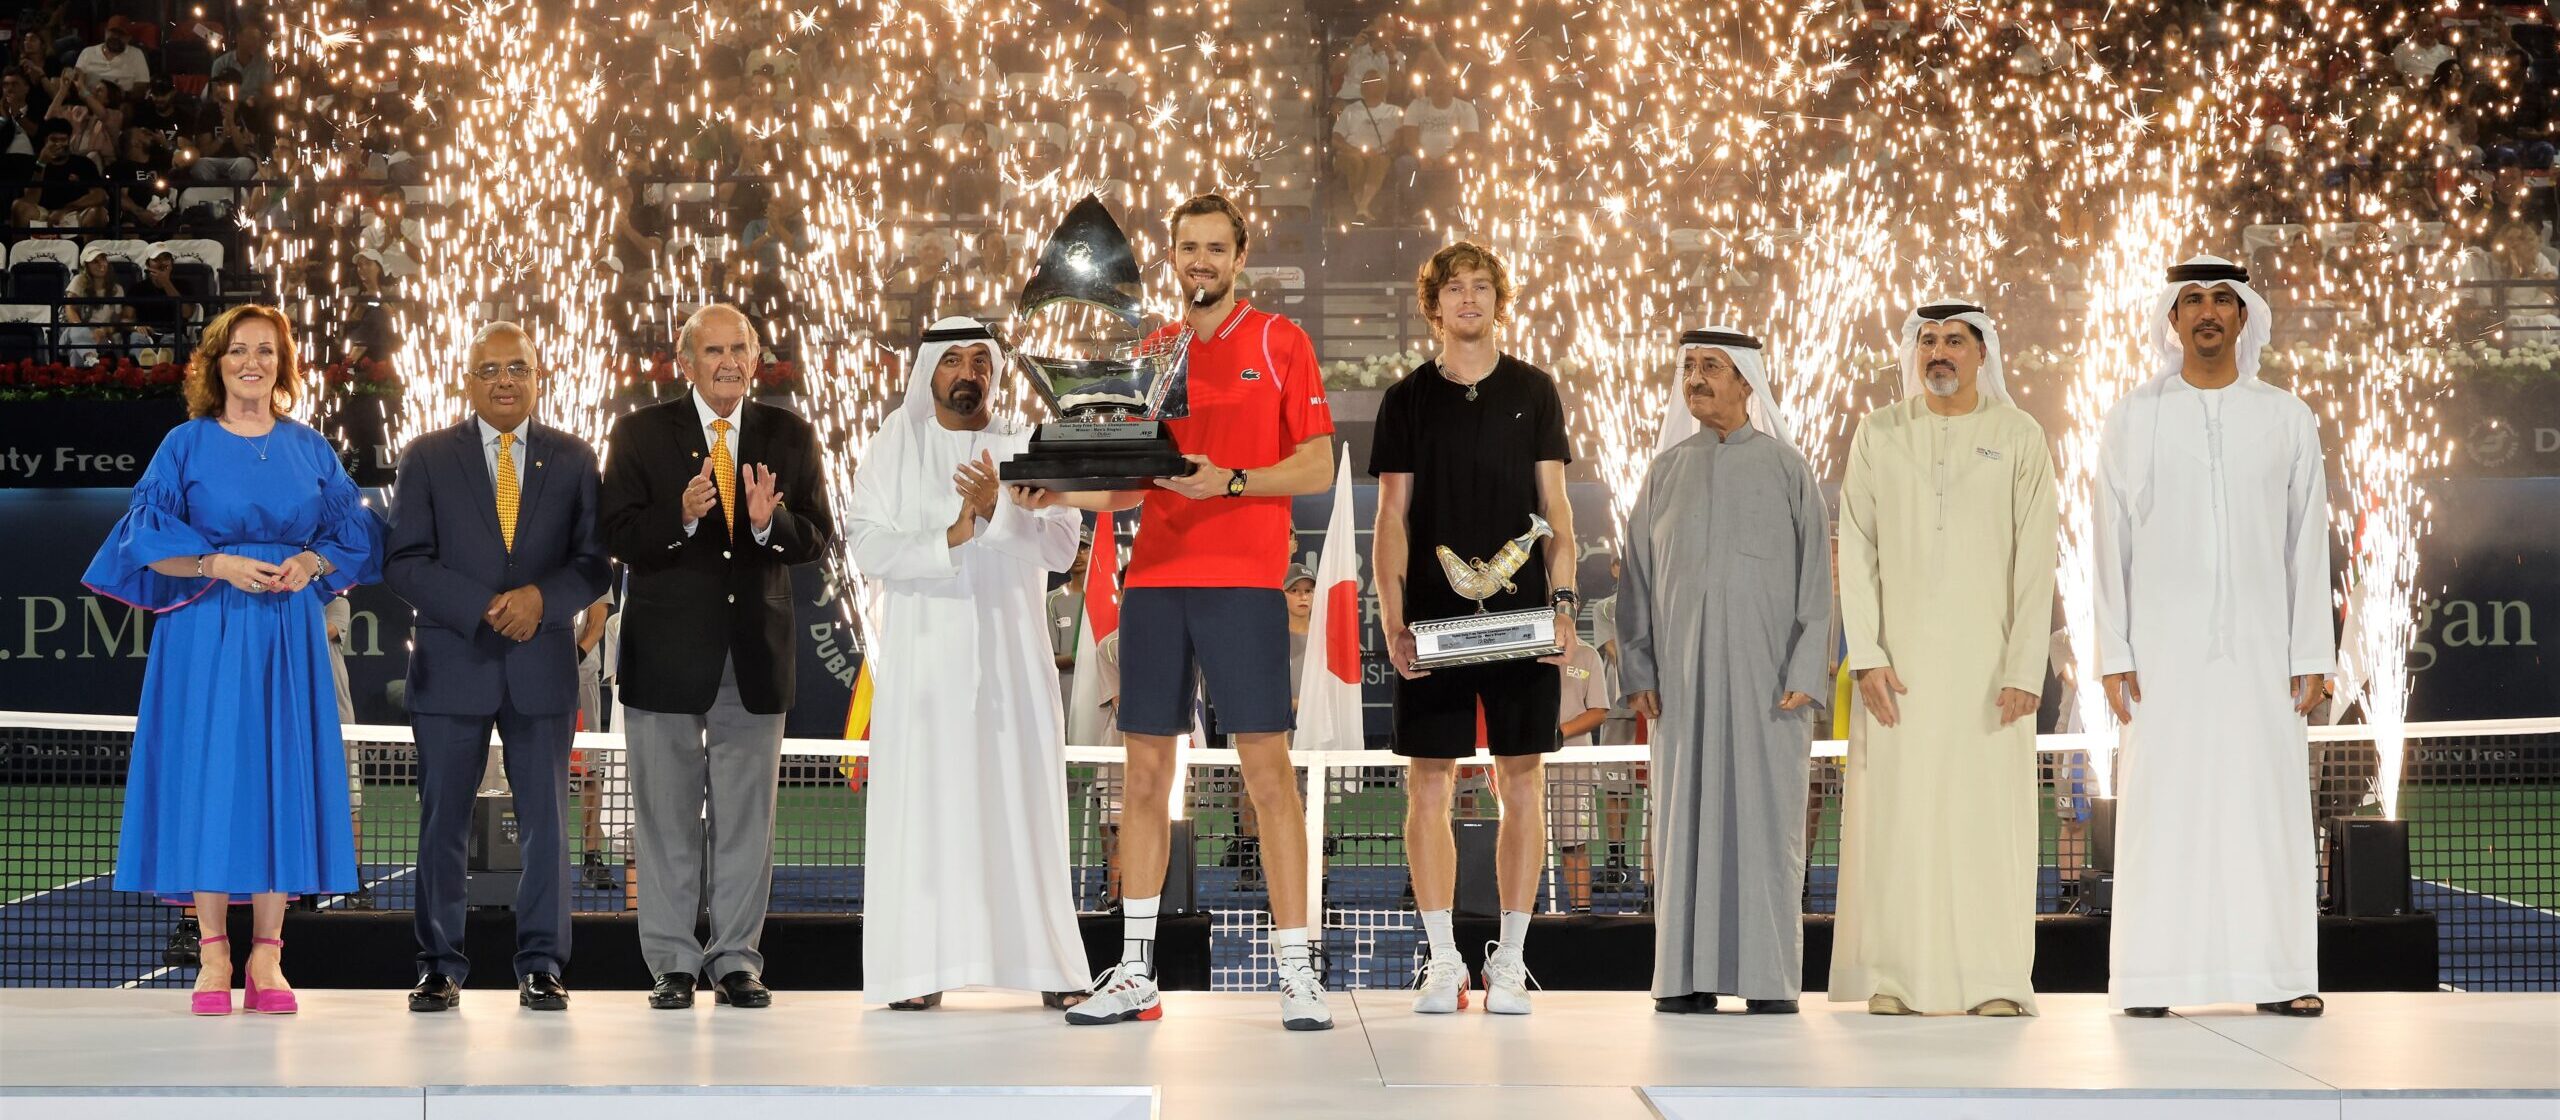 Dubai Tennis Champs on X: It's not long to go now until the 31st edition  of the Dubai Duty Free Championships! Our men's and women's line-up  includes the 2023 Australian Open winners